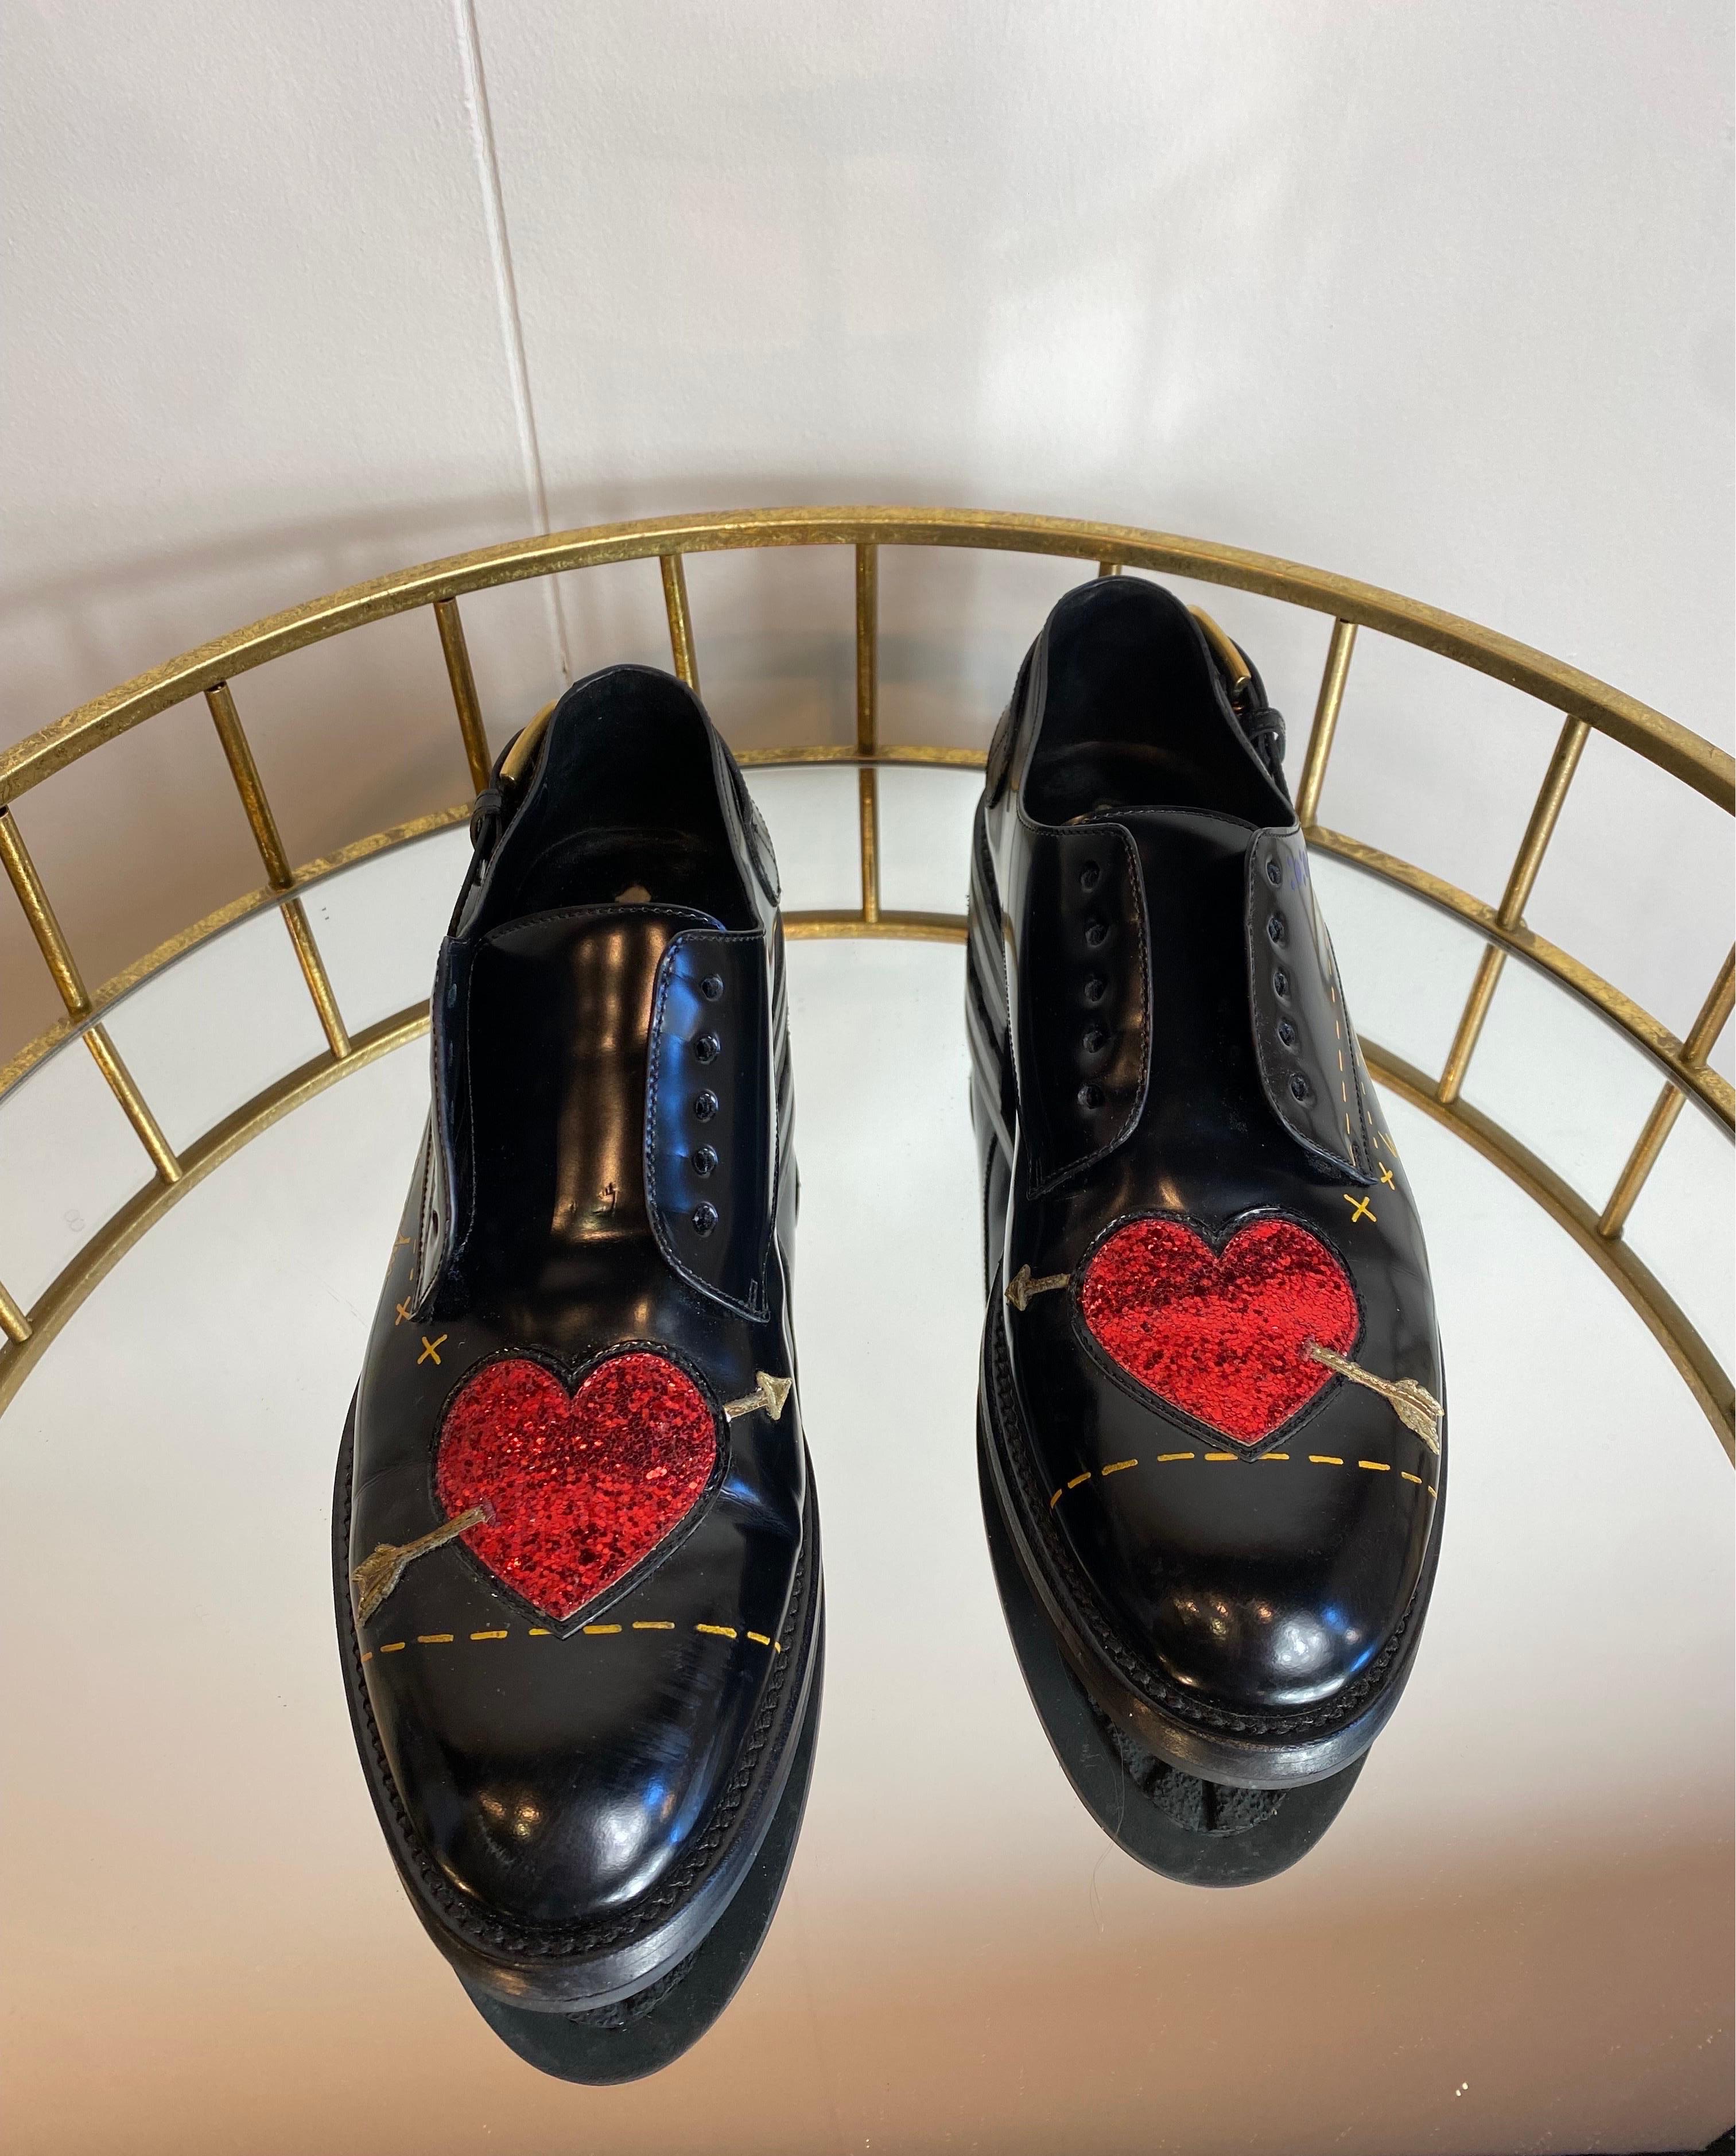 Dolce and Gabbana loafer.
Italian number 40
Inner sole 27 cm
Heel 3 cm
They do not have the original laces.
They have original box.
Excellent general condition with minimal signs of normal use.